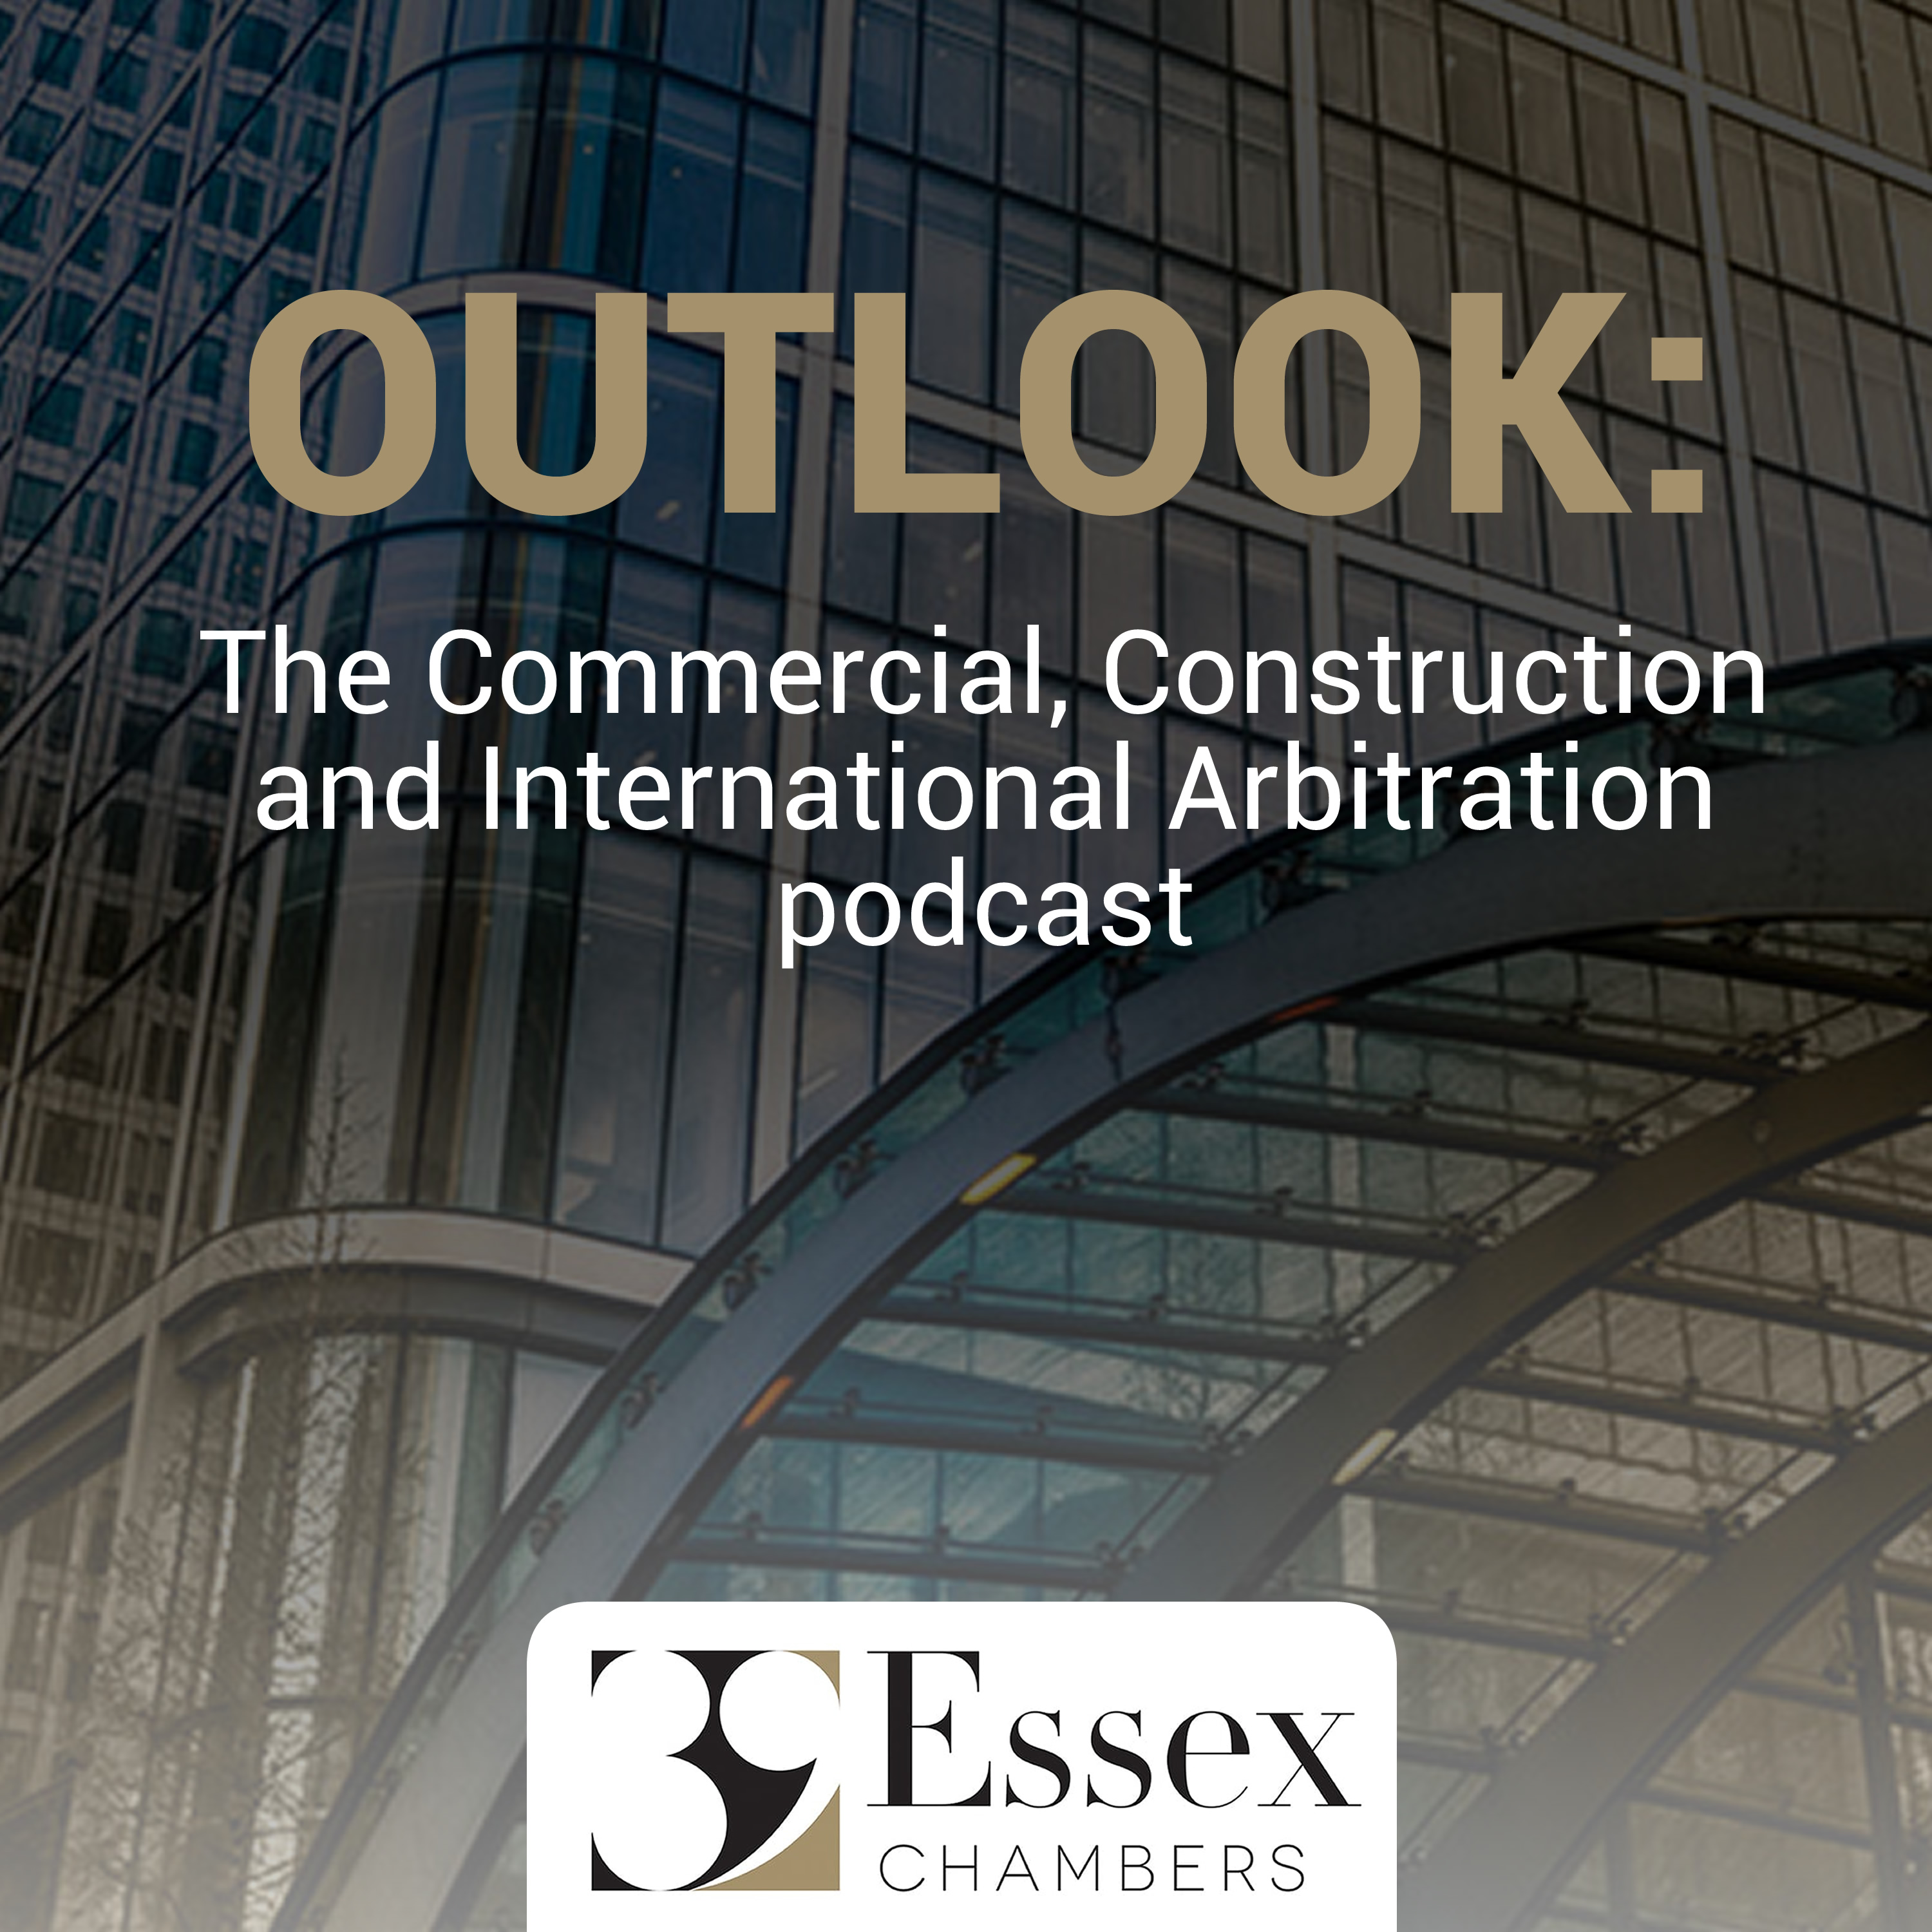 Artwork for podcast OUTLOOK: The Commercial, Construction and International Arbitration podcast